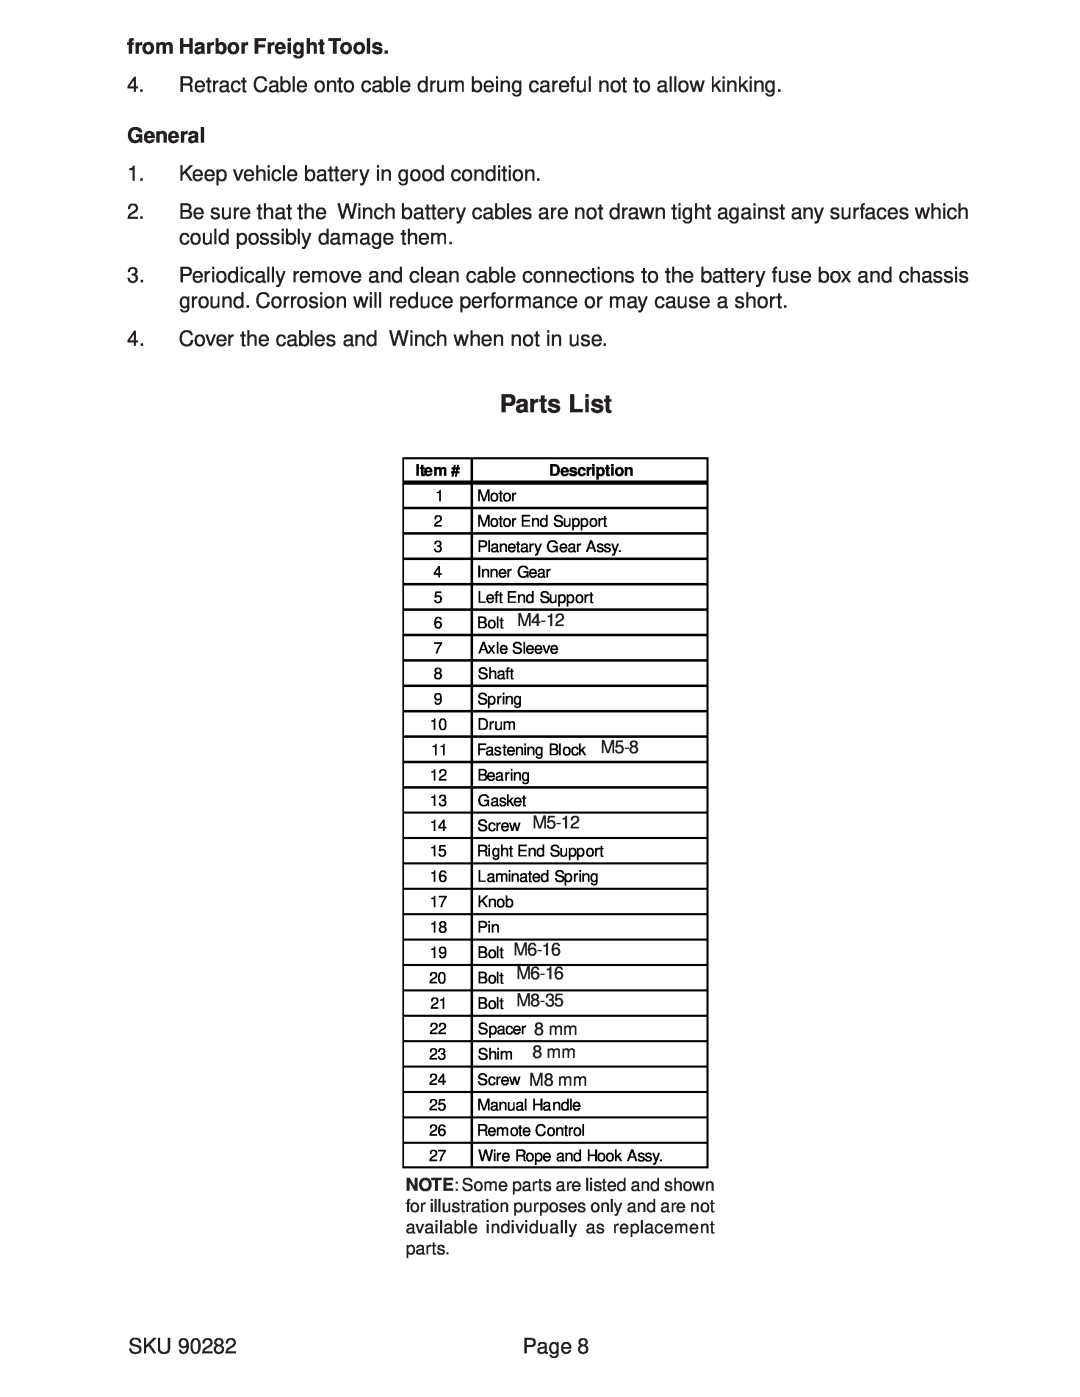 Chicago Electric 90282 manual Parts List, from Harbor Freight Tools, General 